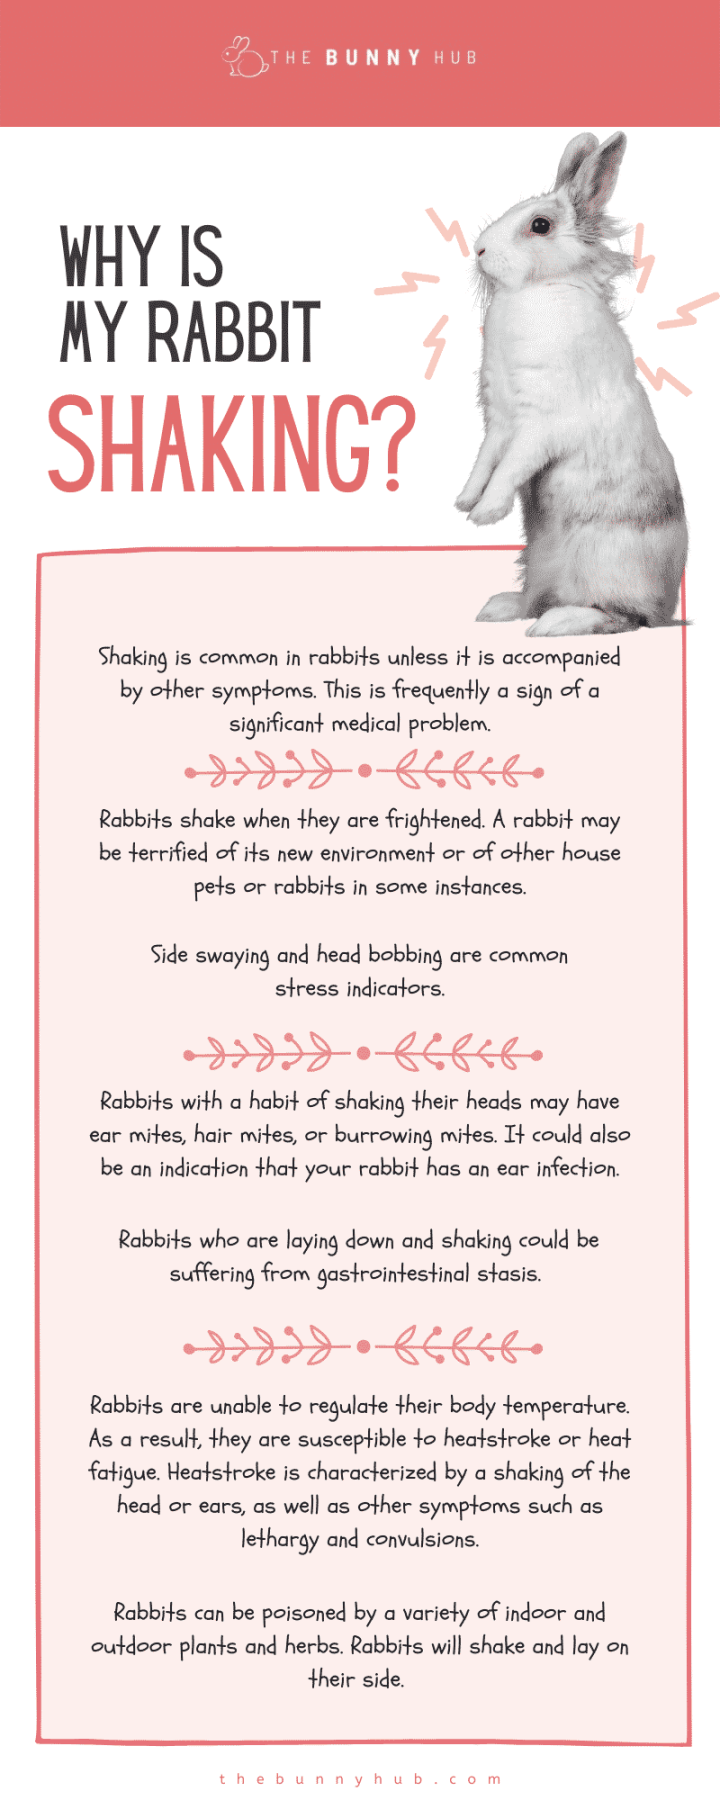 Why Is My Rabbit Shaking? - The Bunny Hub